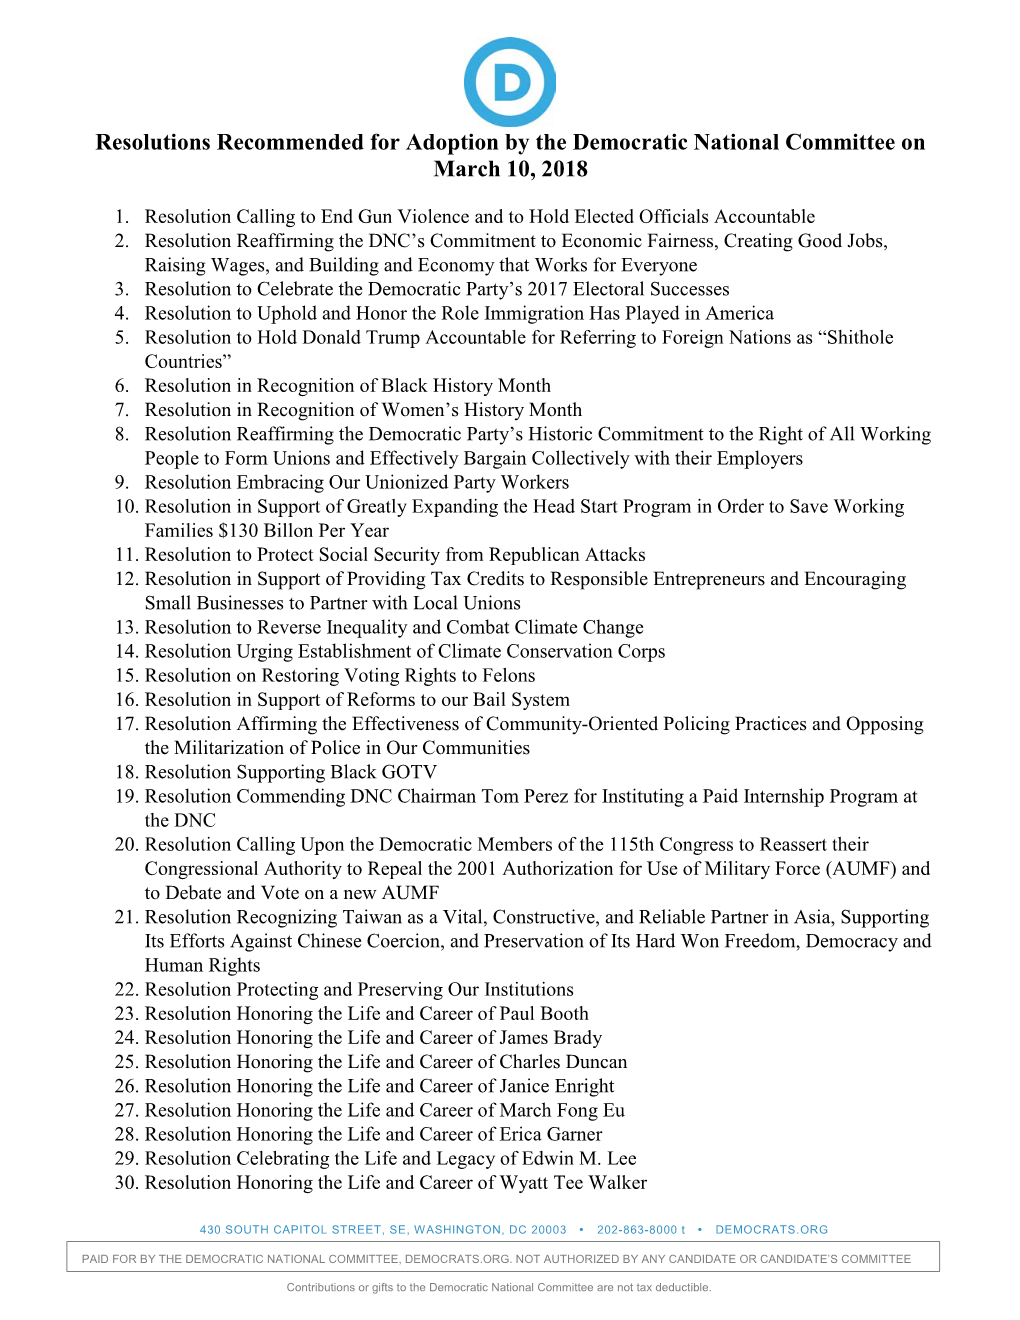 Resolutions Recommended for Adoption by the Democratic National Committee on March 10, 2018